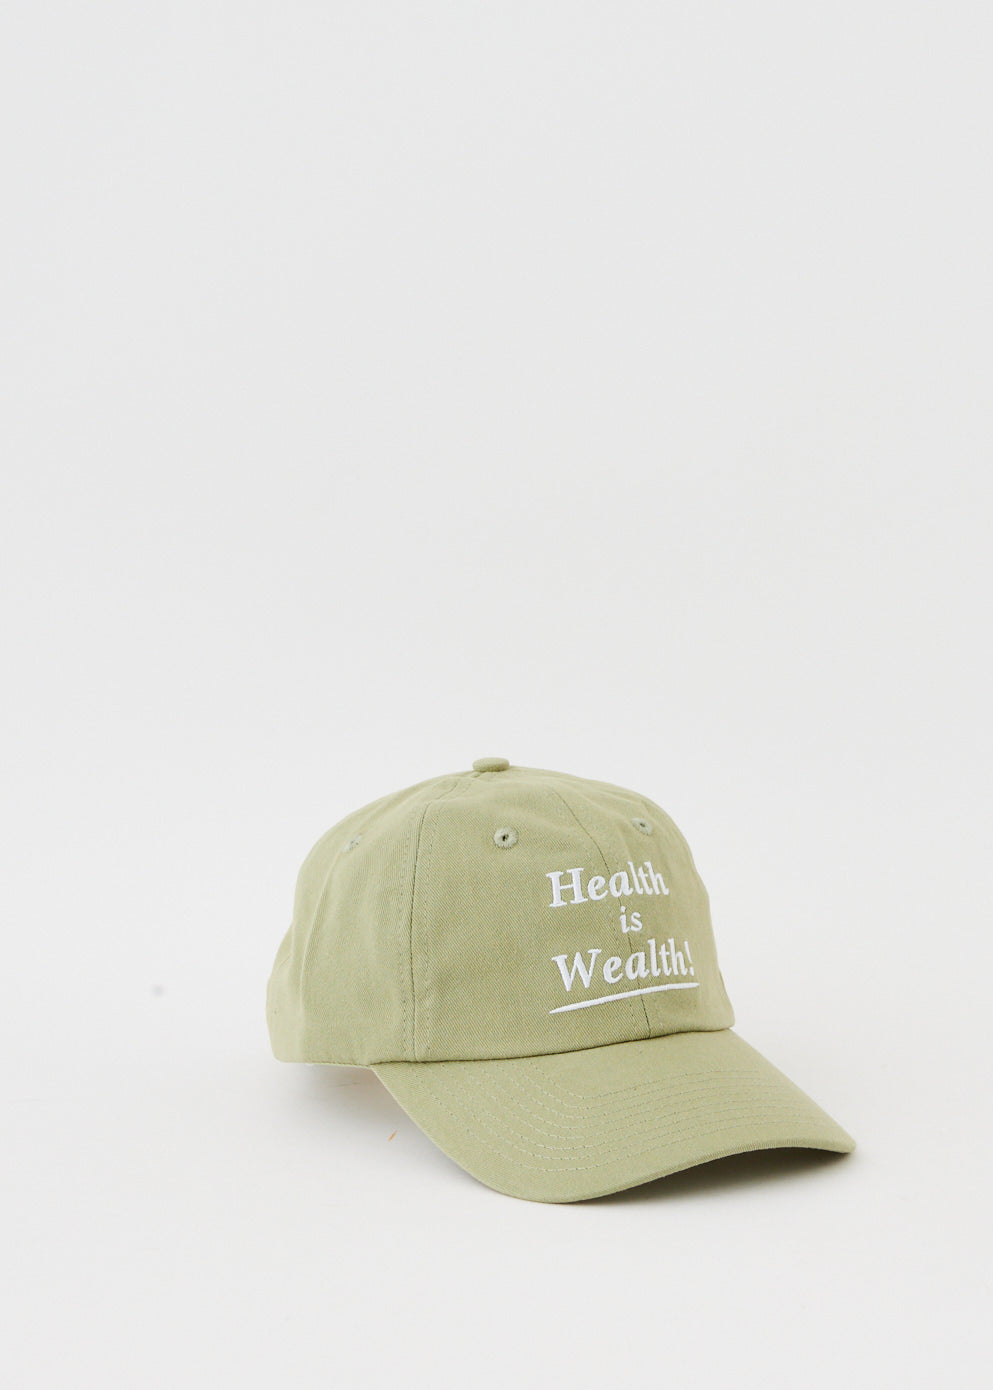 Health is Wealth Hat